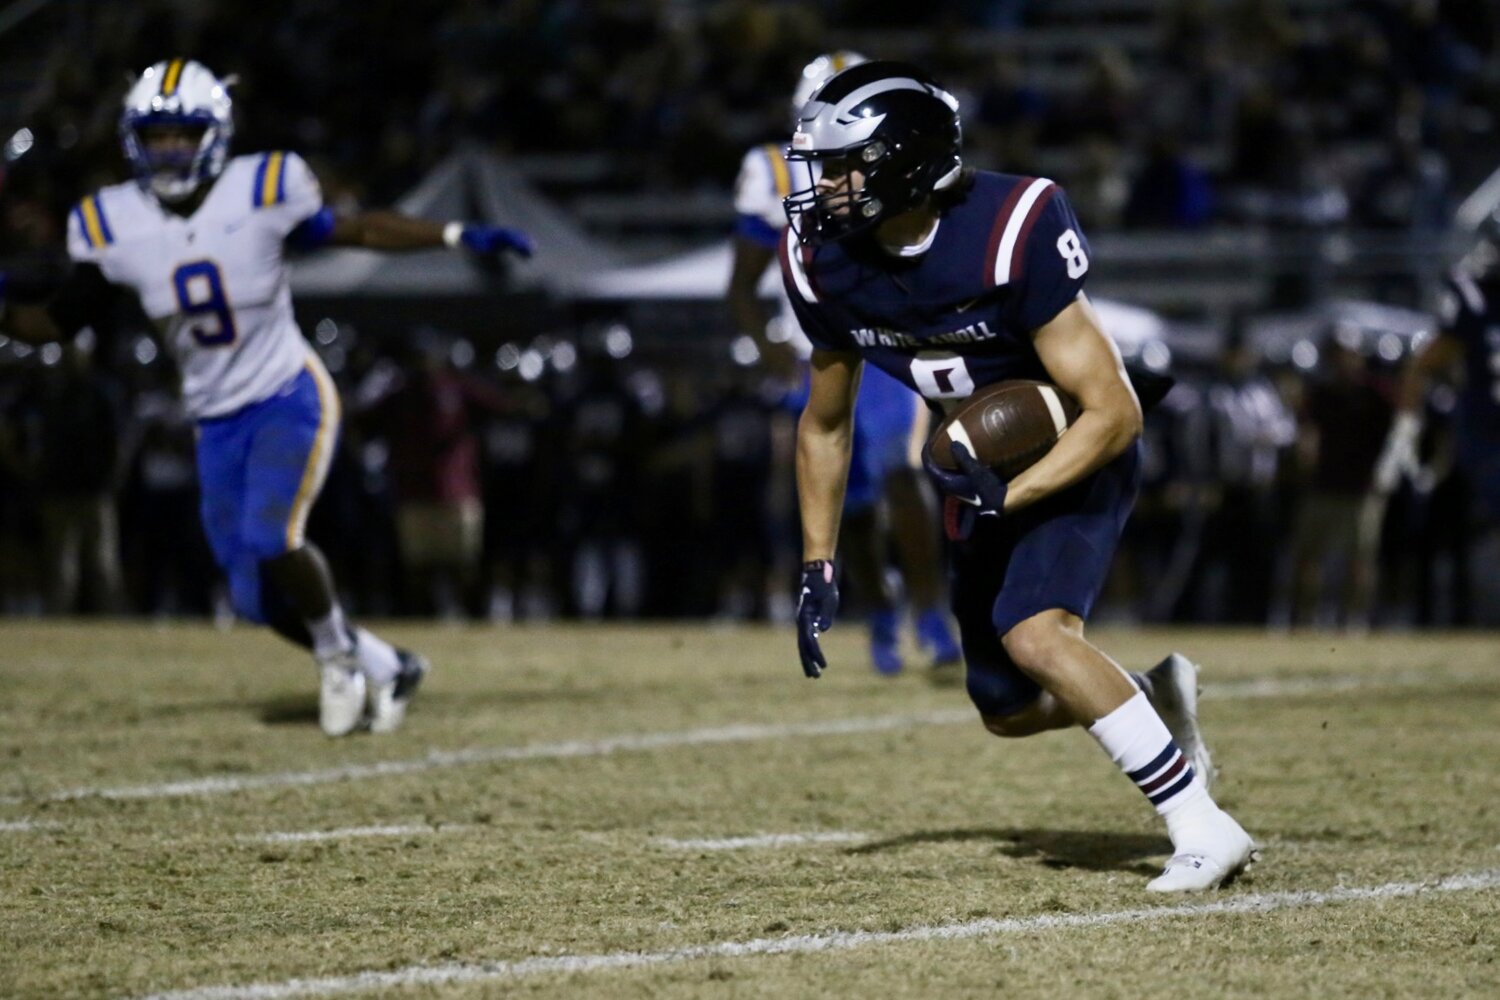 White Knoll defeated Sumter 35-7 Nov. 17 to move on to the 5A Lower State final.